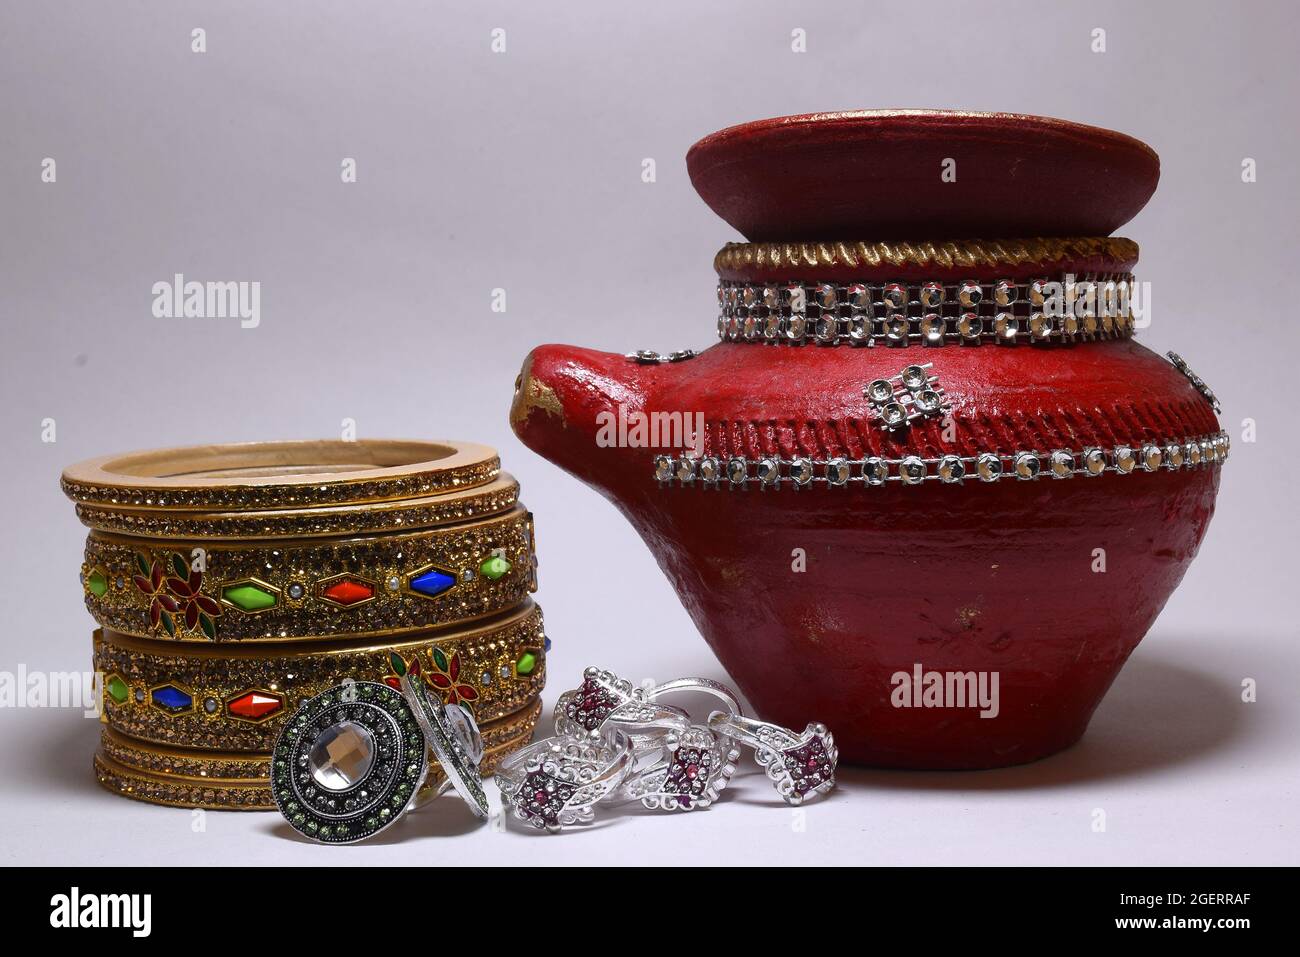 Bangle, nettle and beautiful pot made of clay for indian festival Karva Chauth. Stock Photo